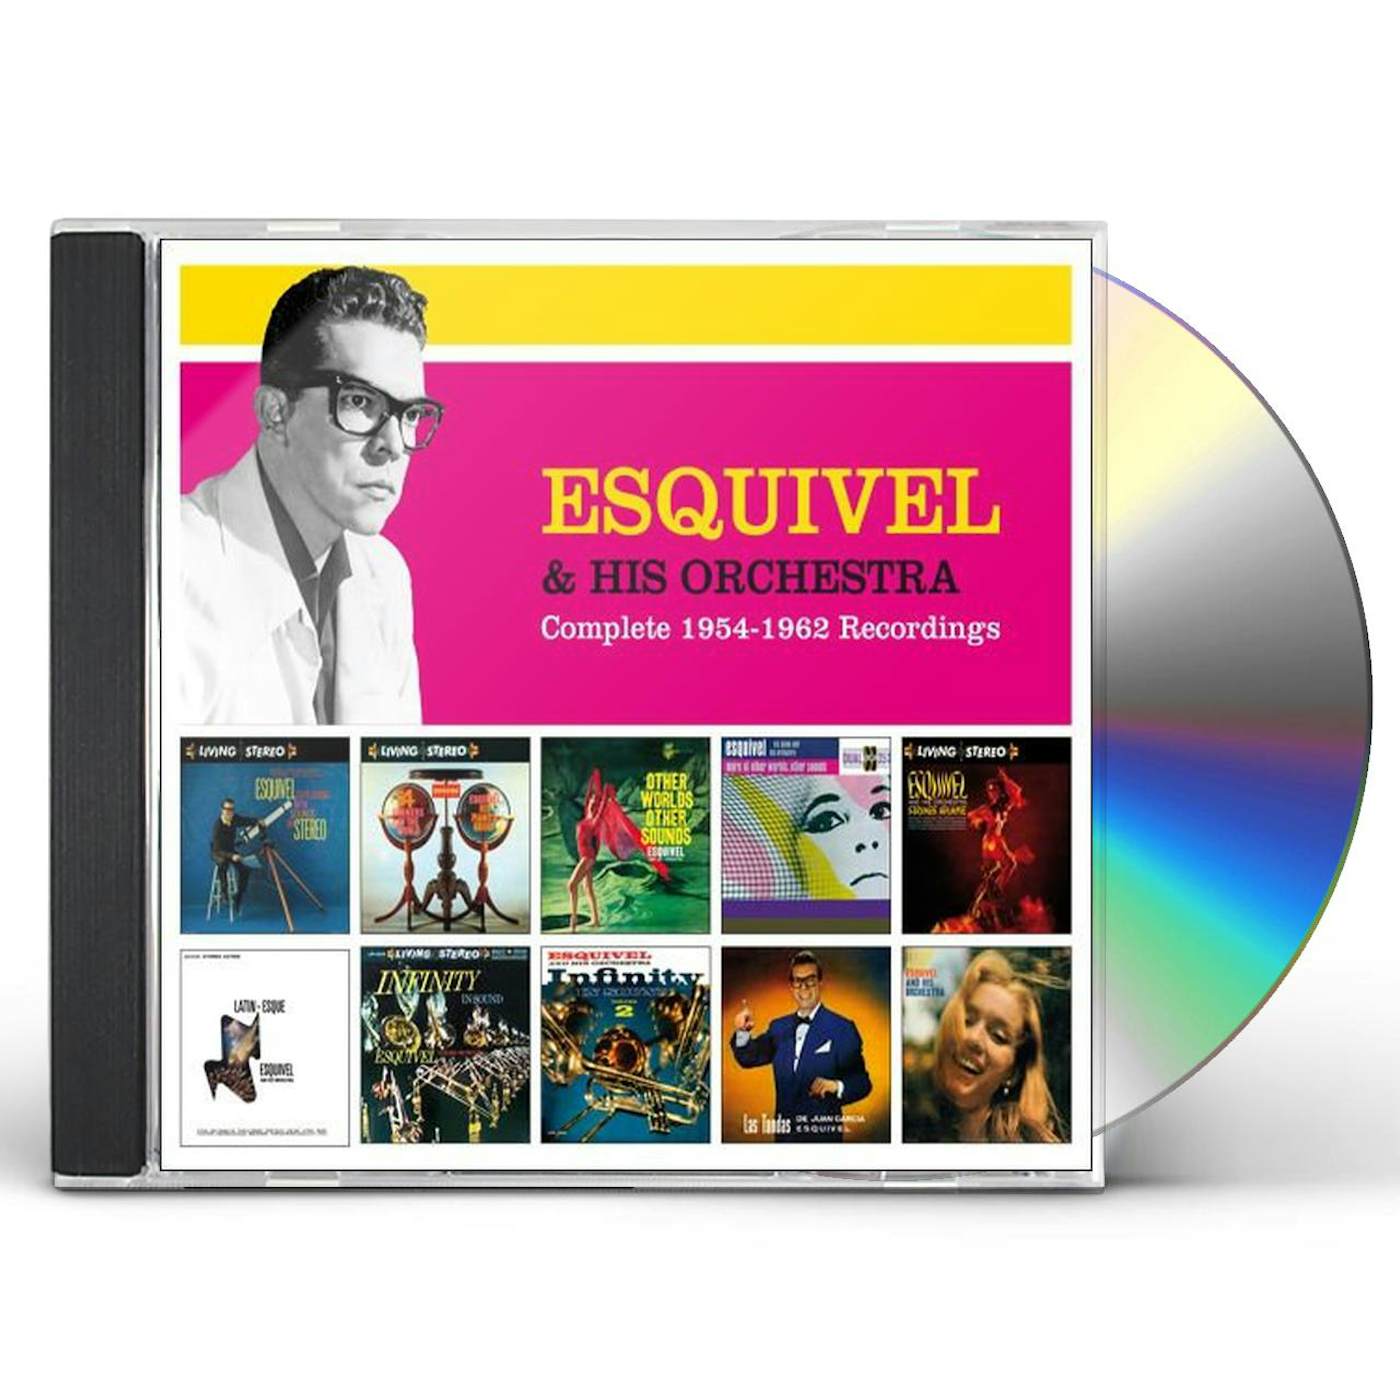 Esquivel & His Orchestra COMPLETE 1954-1962 RECORDINGS CD